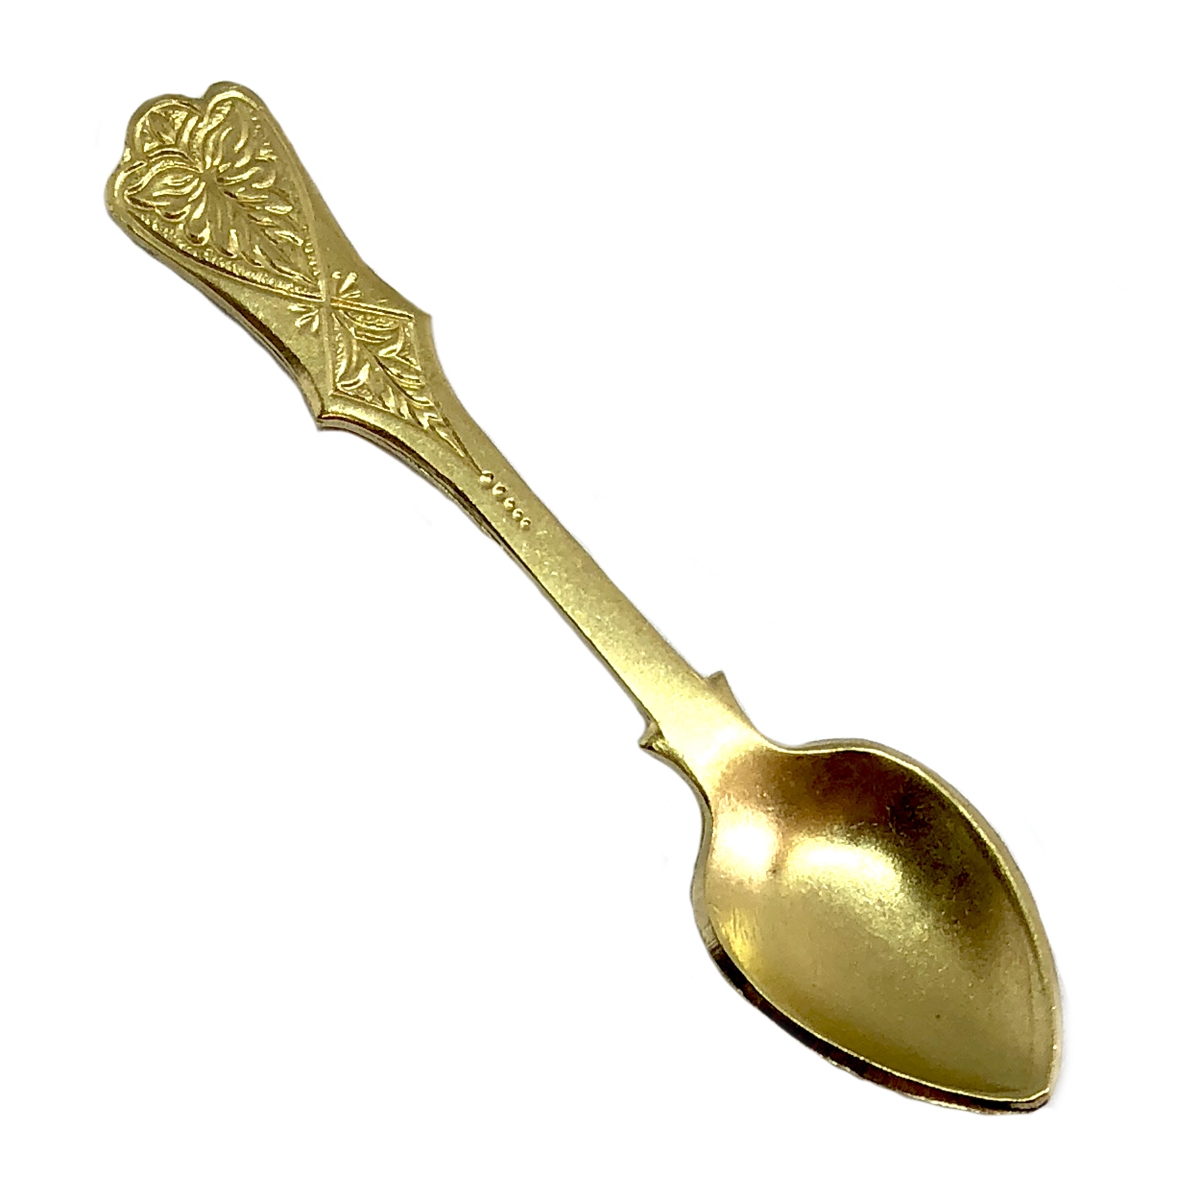 Vintage Nebco Tor-P-Do 3, 1oz Hammered Brass fishing spoon #12762